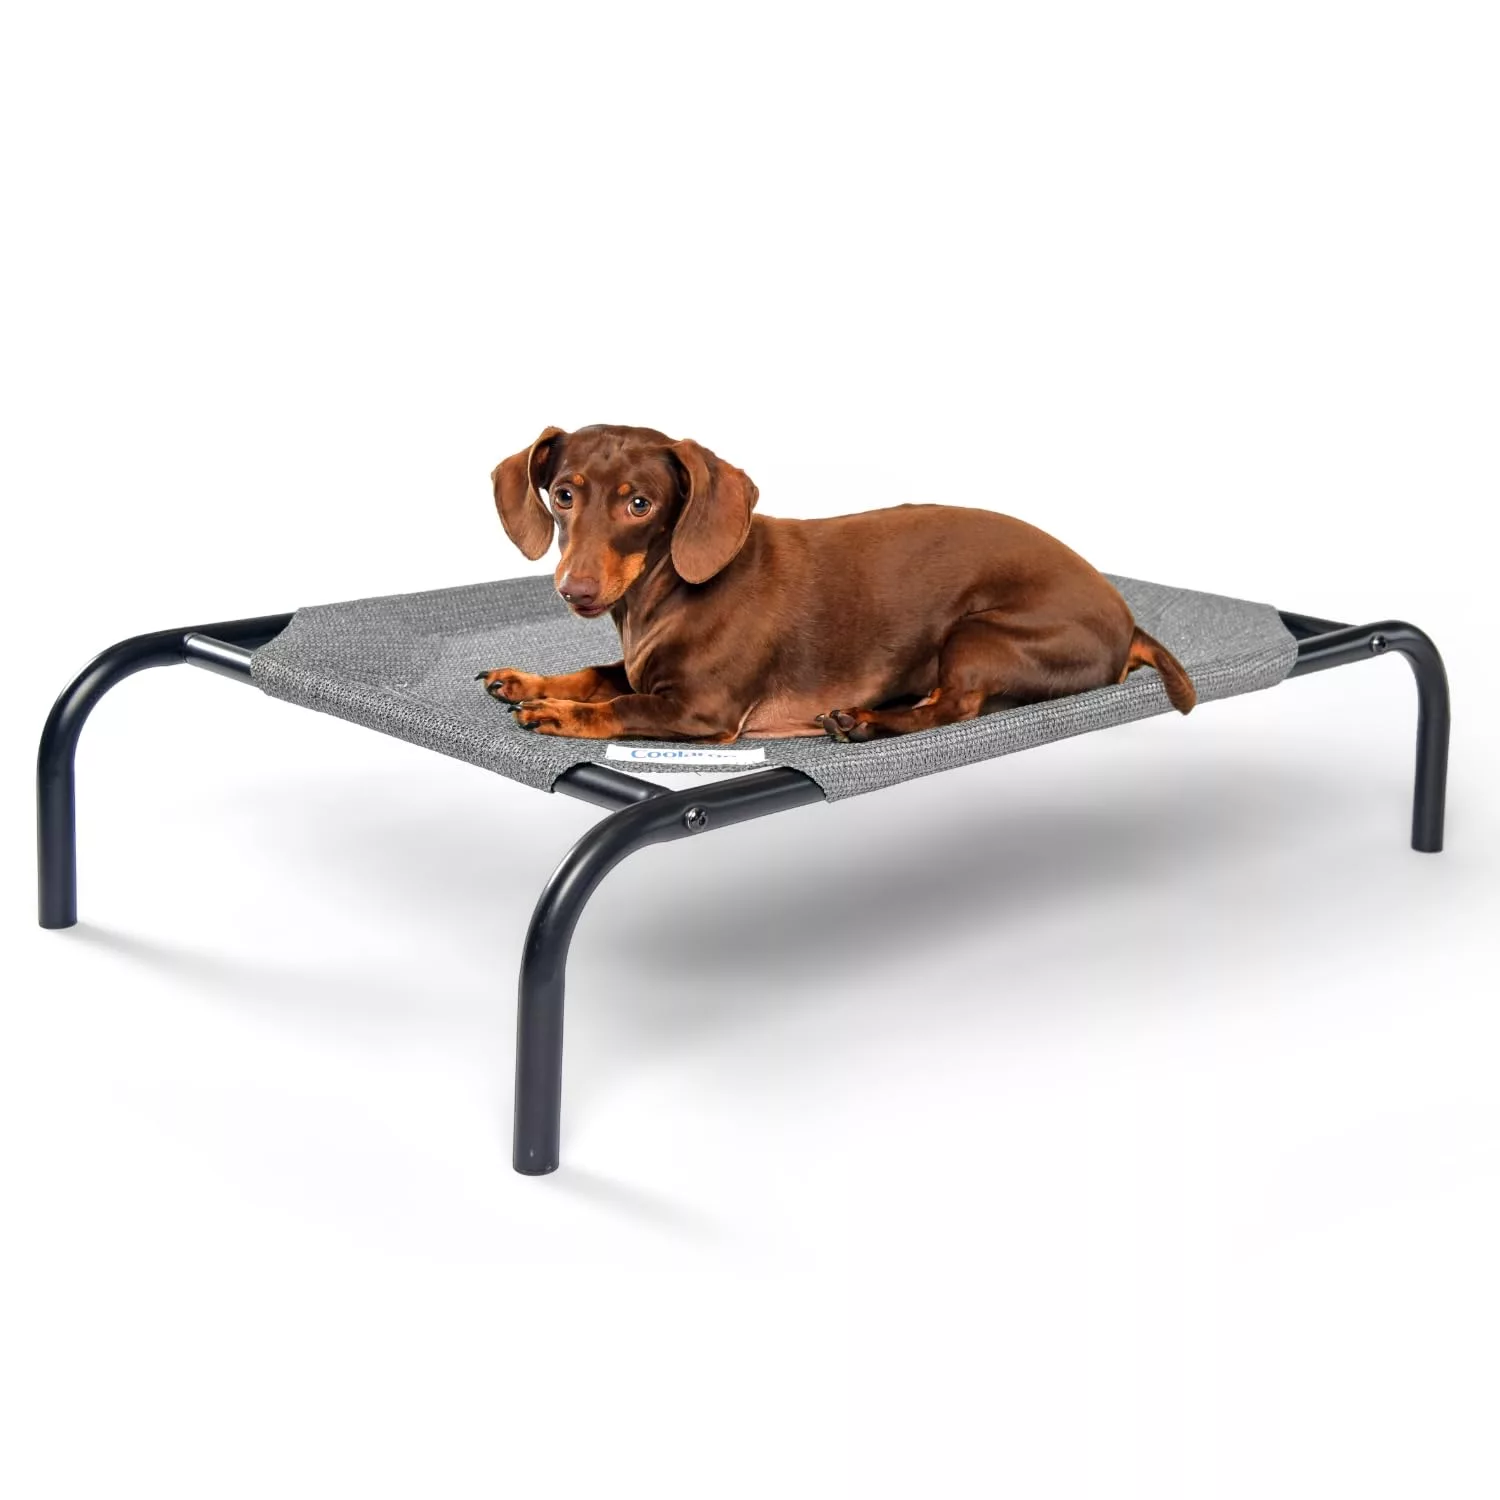 Coolaroo Dog Bed Review